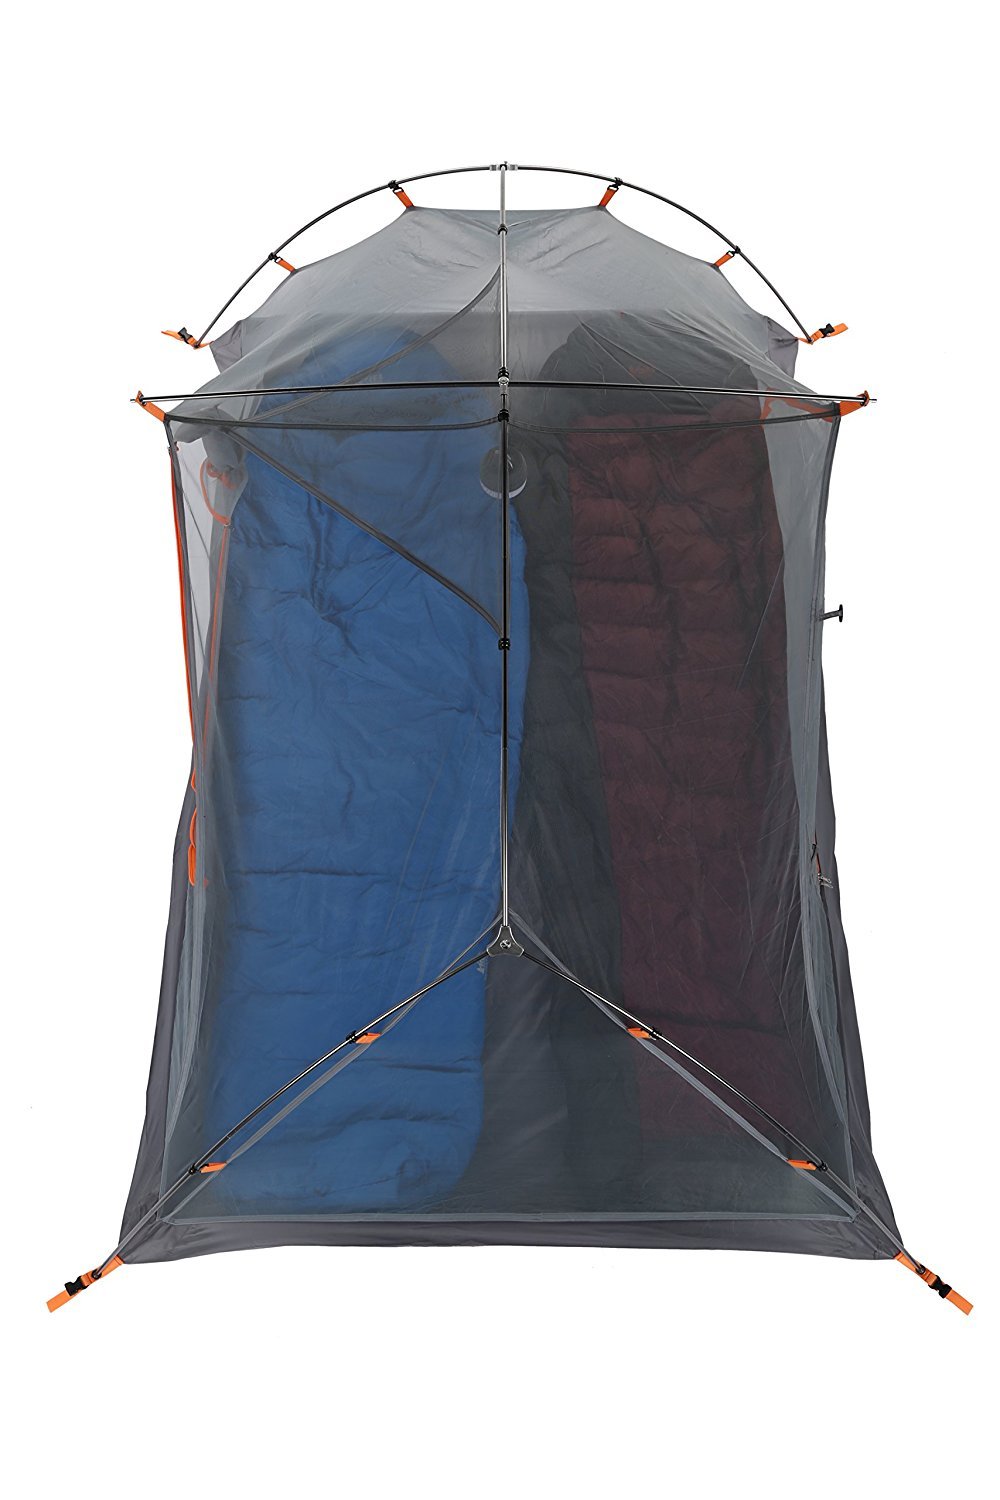 Featherstone |  UL Granite 2P Backpacking Tent, Tents, Featherstone, Defiance Outdoor Gear Co.